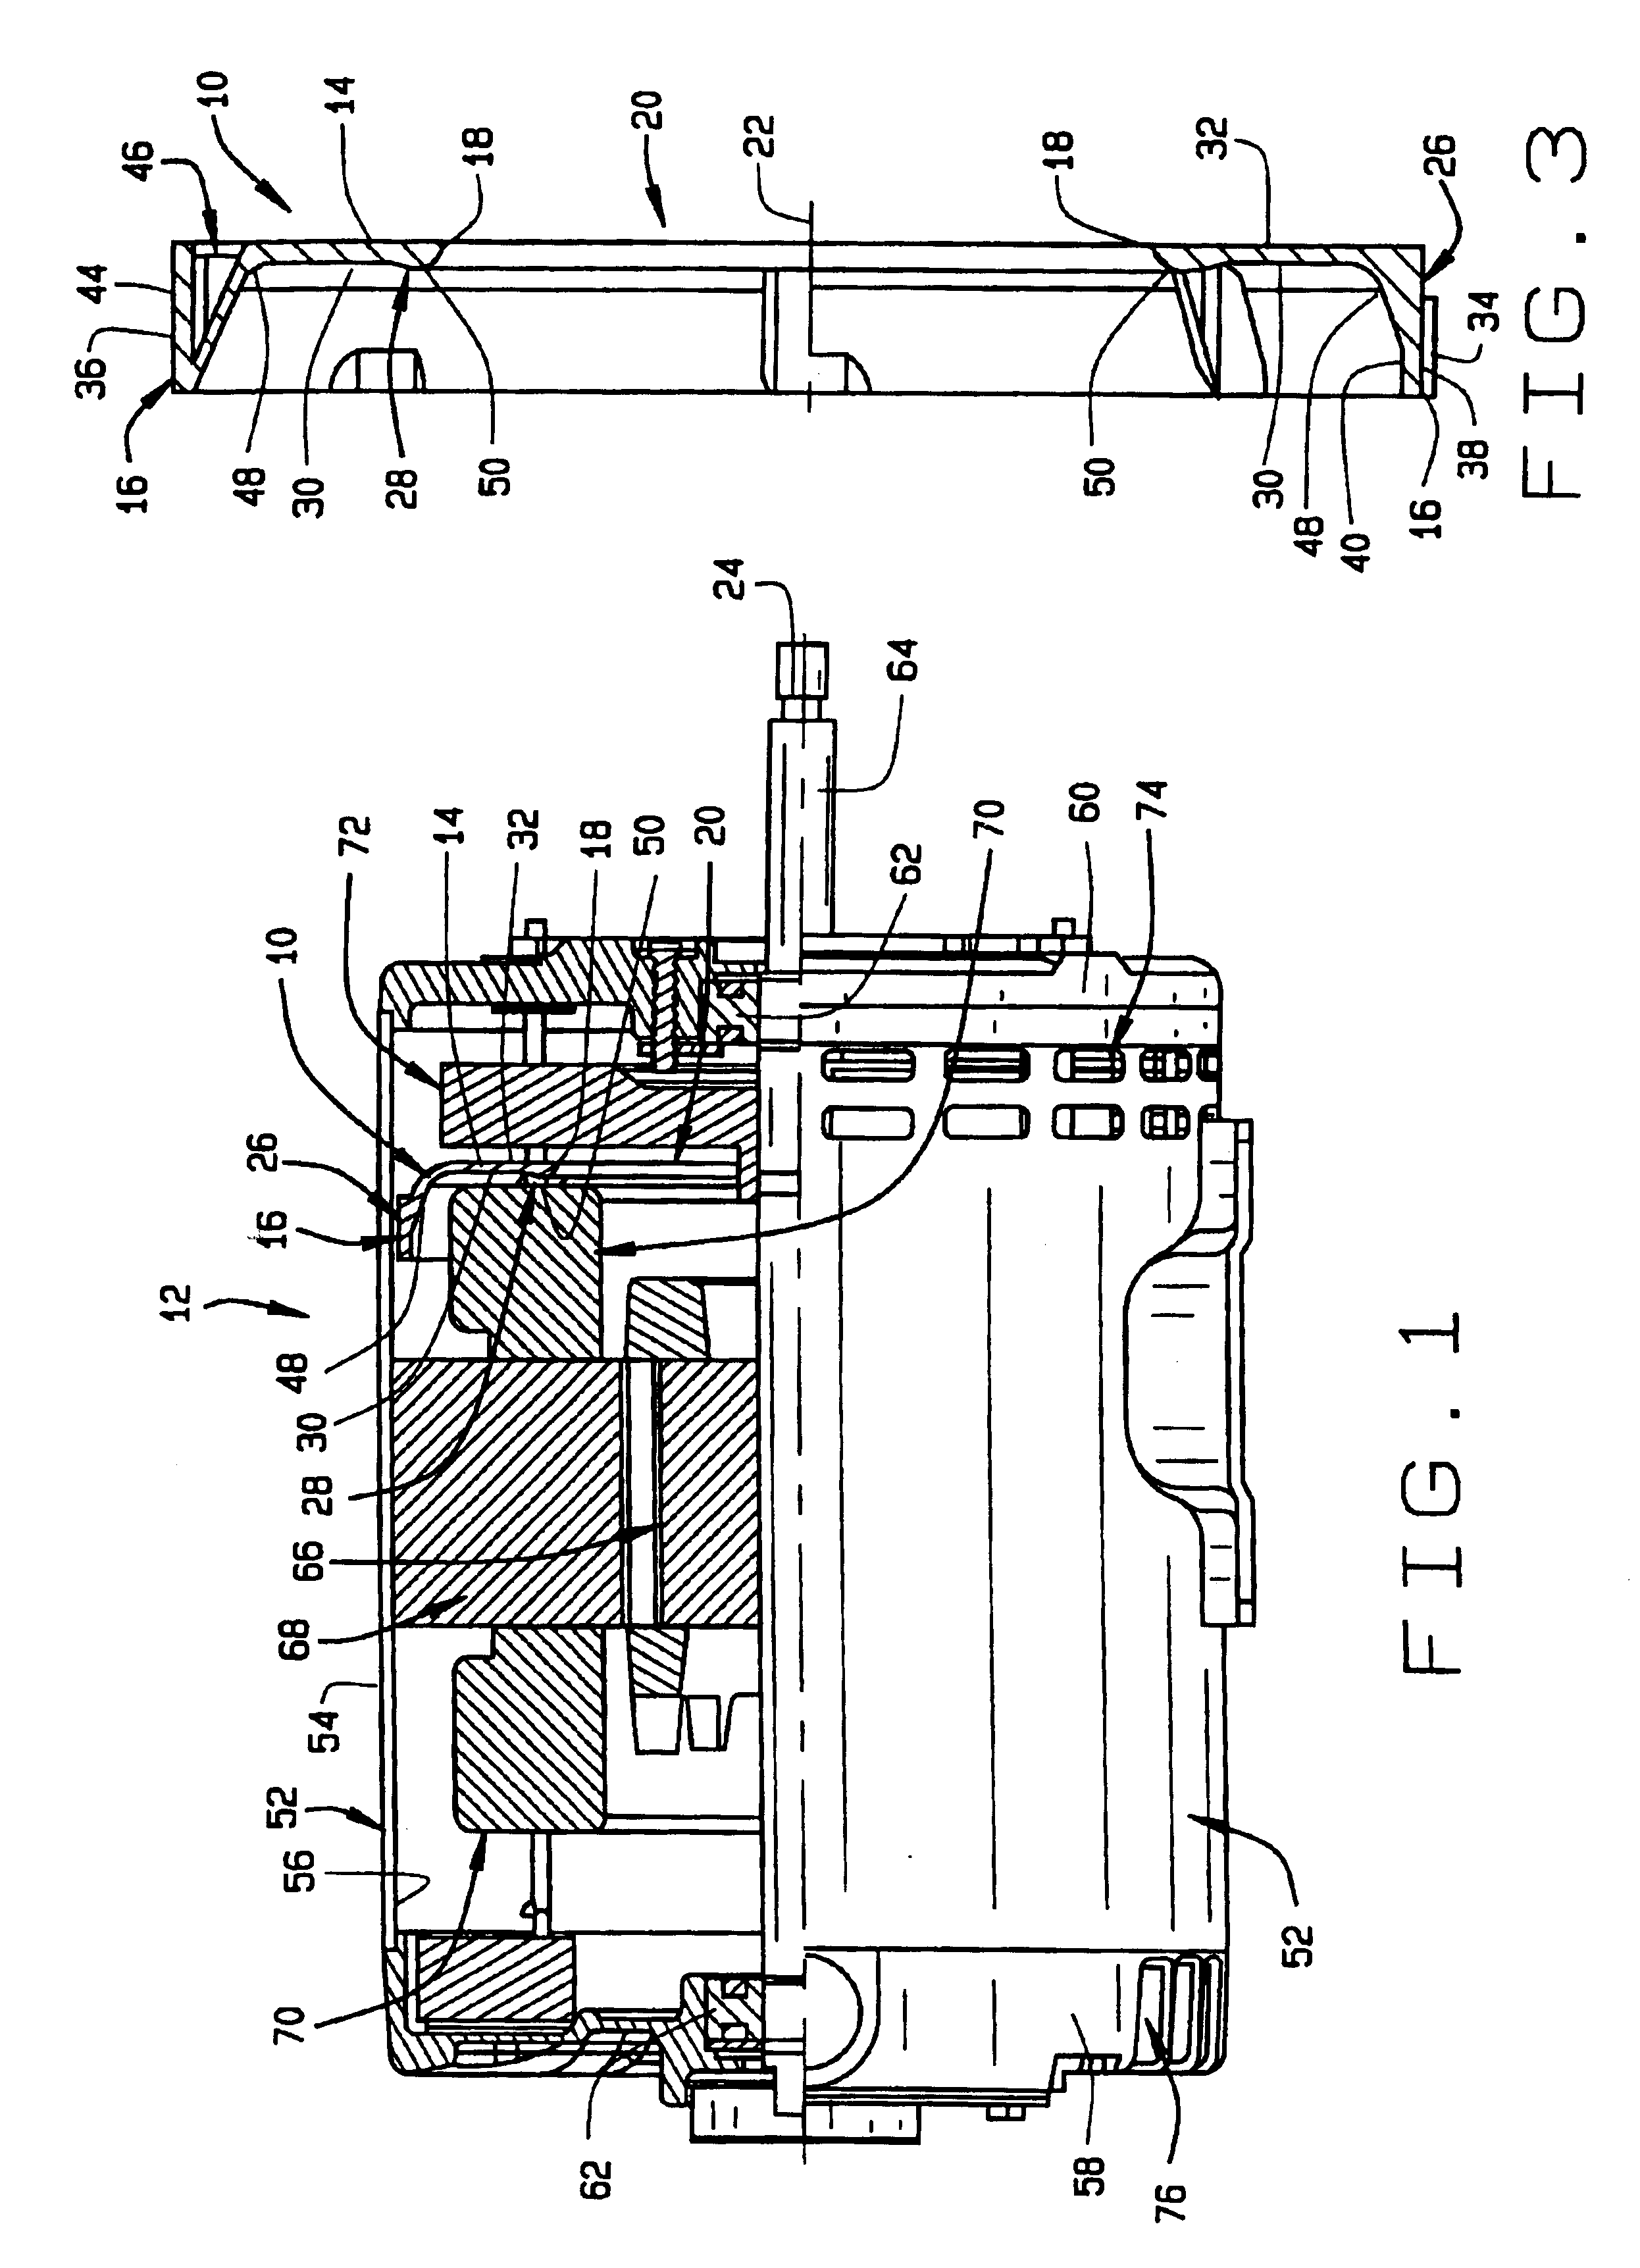 Dynamoelectric device air flow baffle shaped to increase heat transfer